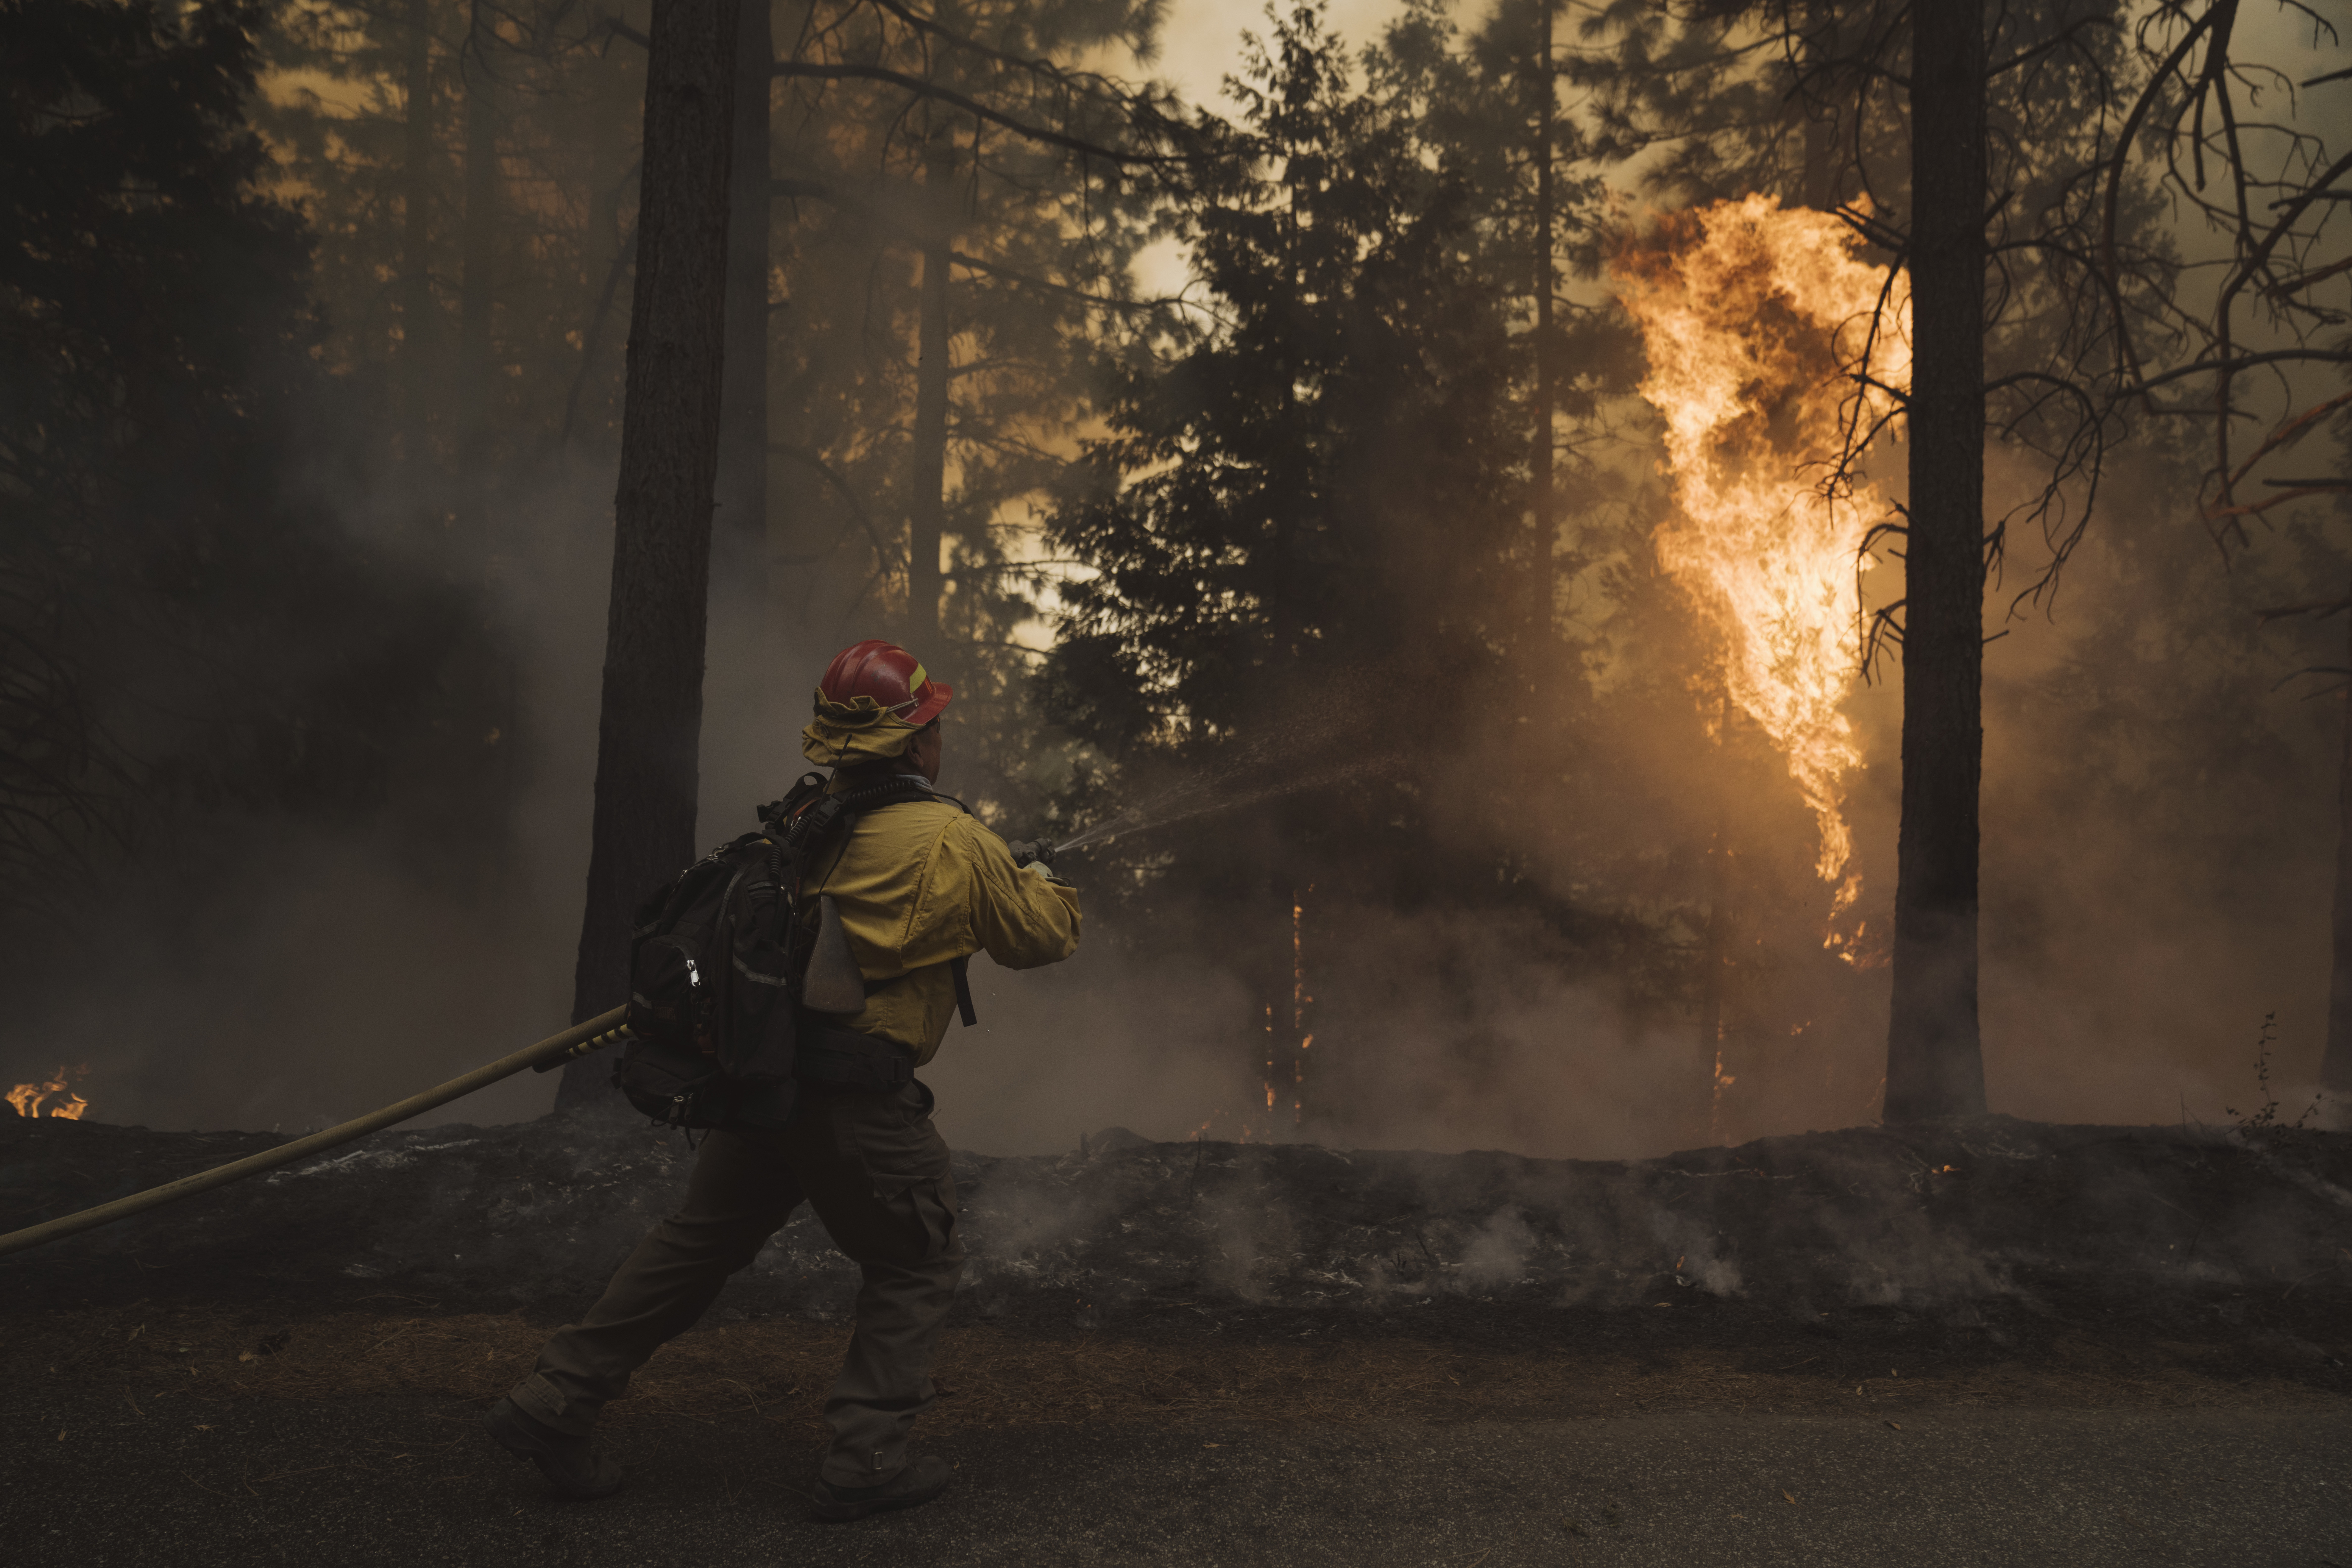 RAMSEY CROSSING, CA - SEPTEMBER 15: A firefighter battles flames from the Mosquito Fire on September 15, 2022 in Ramsey Crossing, California. The Mosquito Fire officially became the state's biggest fire of the year and is still only 20 percent contained. (Photo by Eric Thayer/Getty Images)